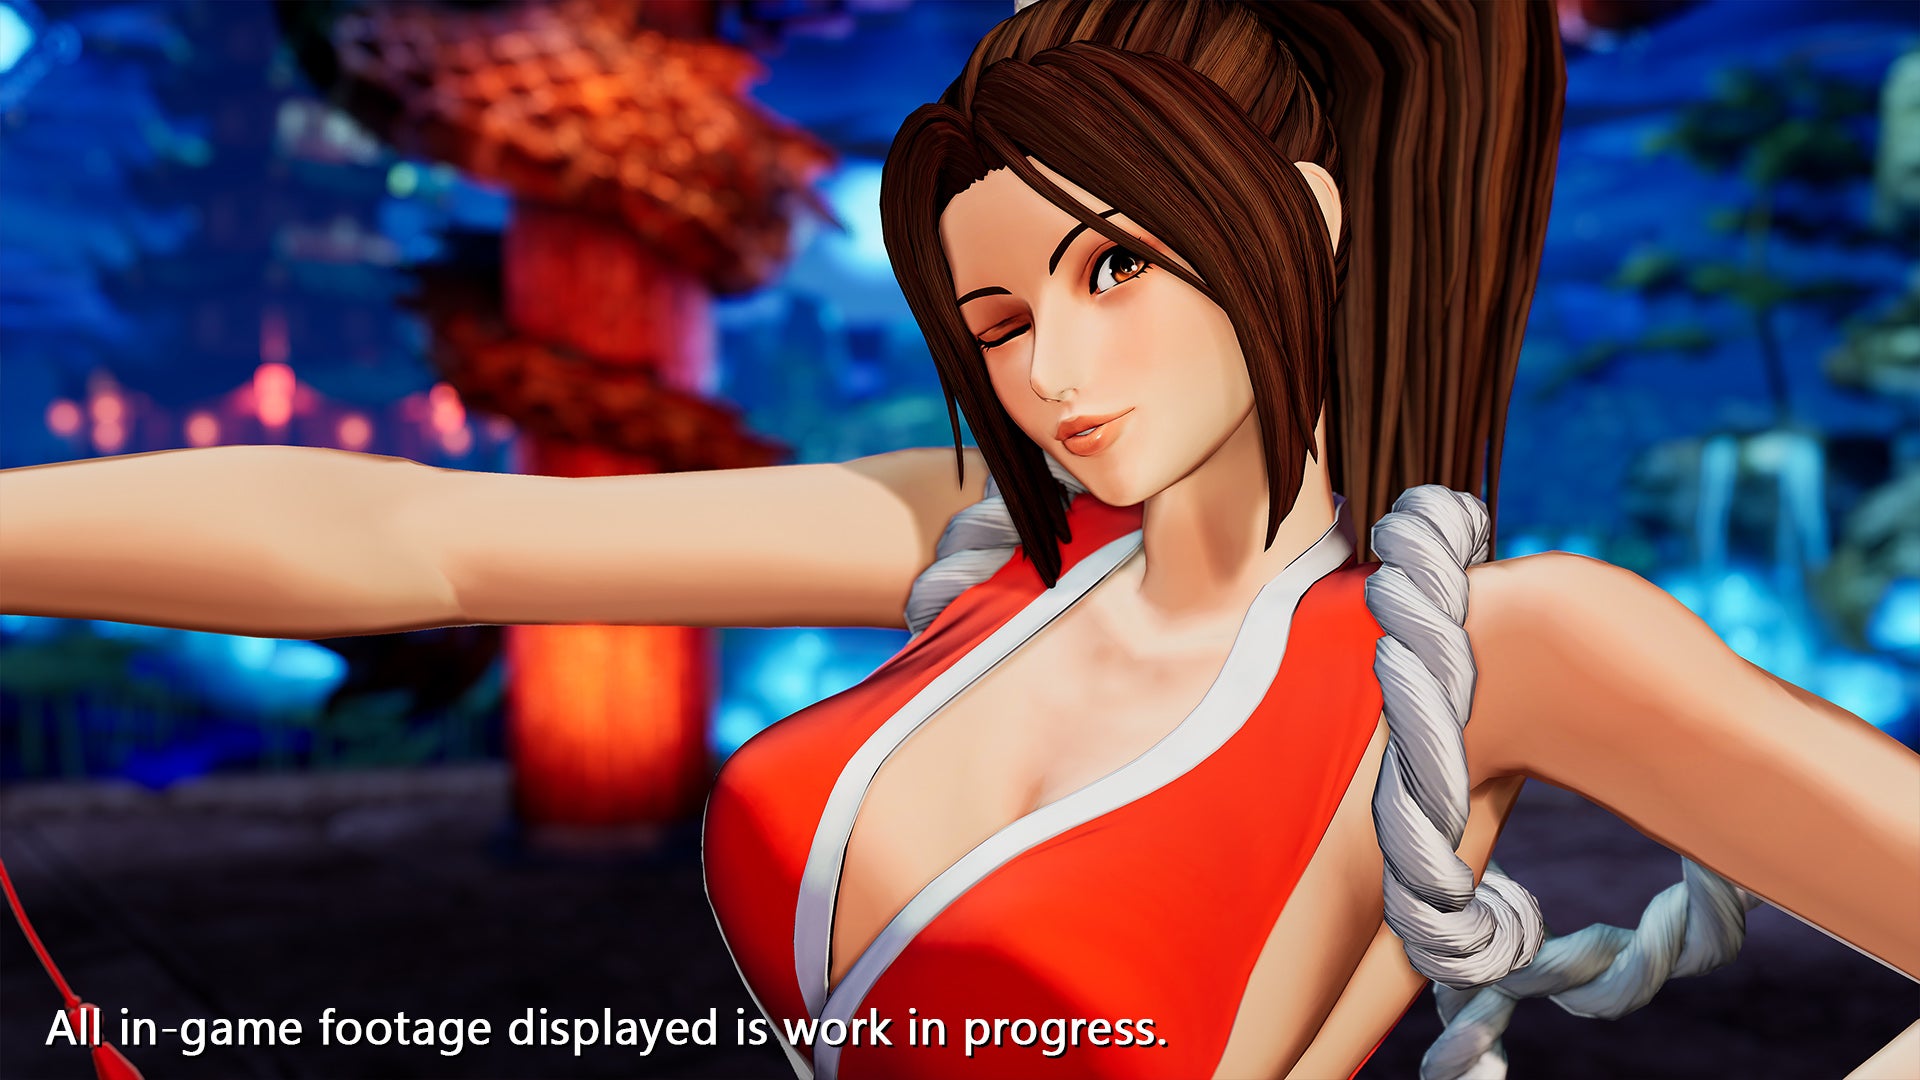 Image for The King of Fighters 15 adds Mai Shiranui to the roster with a new trailer